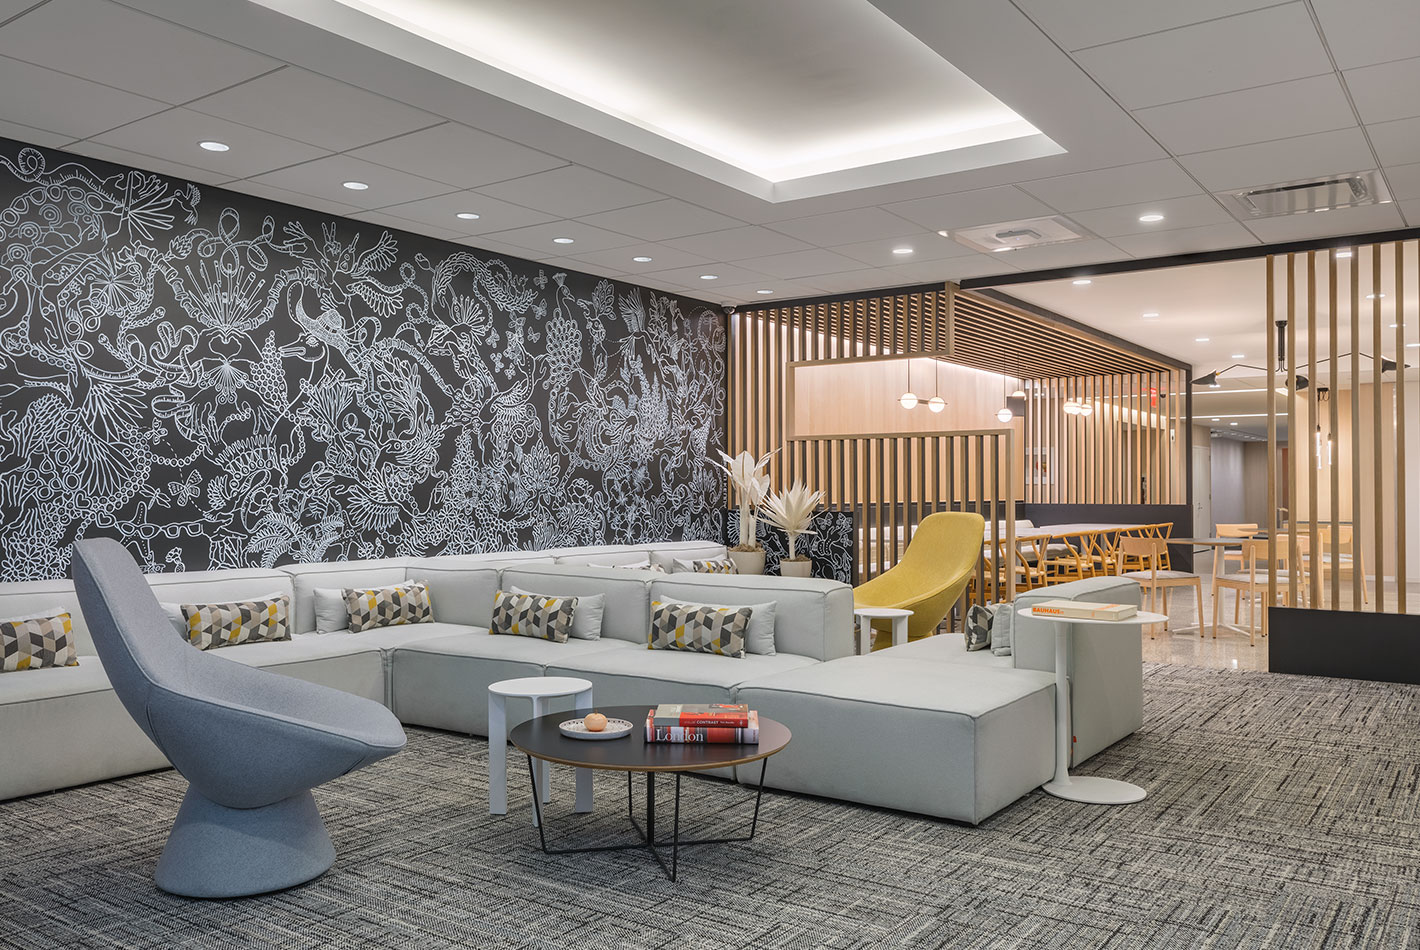 Highly stylized wallpaper and mid-century patterned carpeting create a playful atmosphere in the lounge area of J Crew Headquarters. Long intersecting sectional furniture provides seating